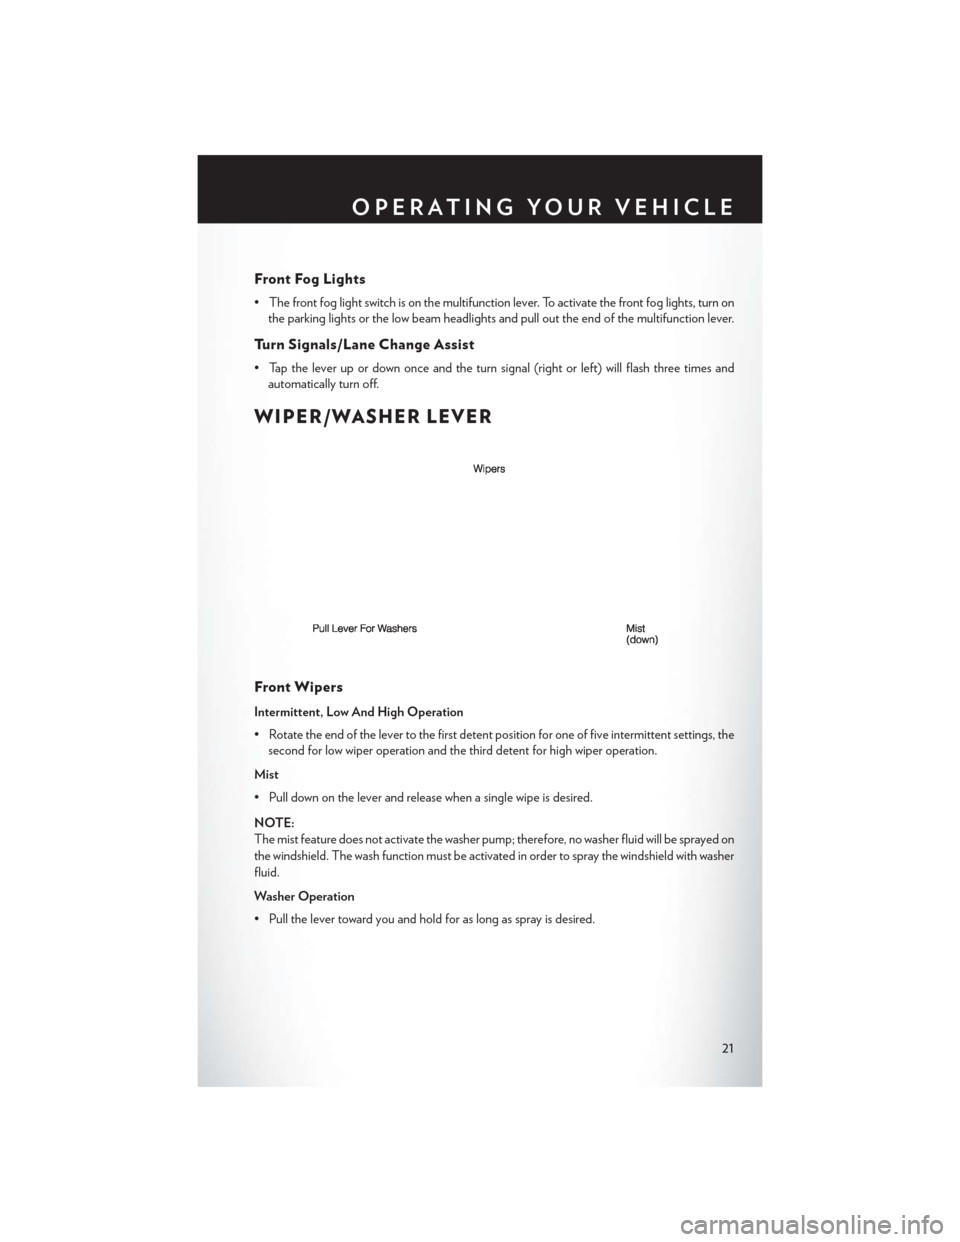 CHRYSLER 200 2014 1.G User Guide Front Fog Lights
• The front fog light switch is on the multifunction lever. To activate the front fog lights, turn onthe parking lights or the low beam headlights and pull out the end of the multif